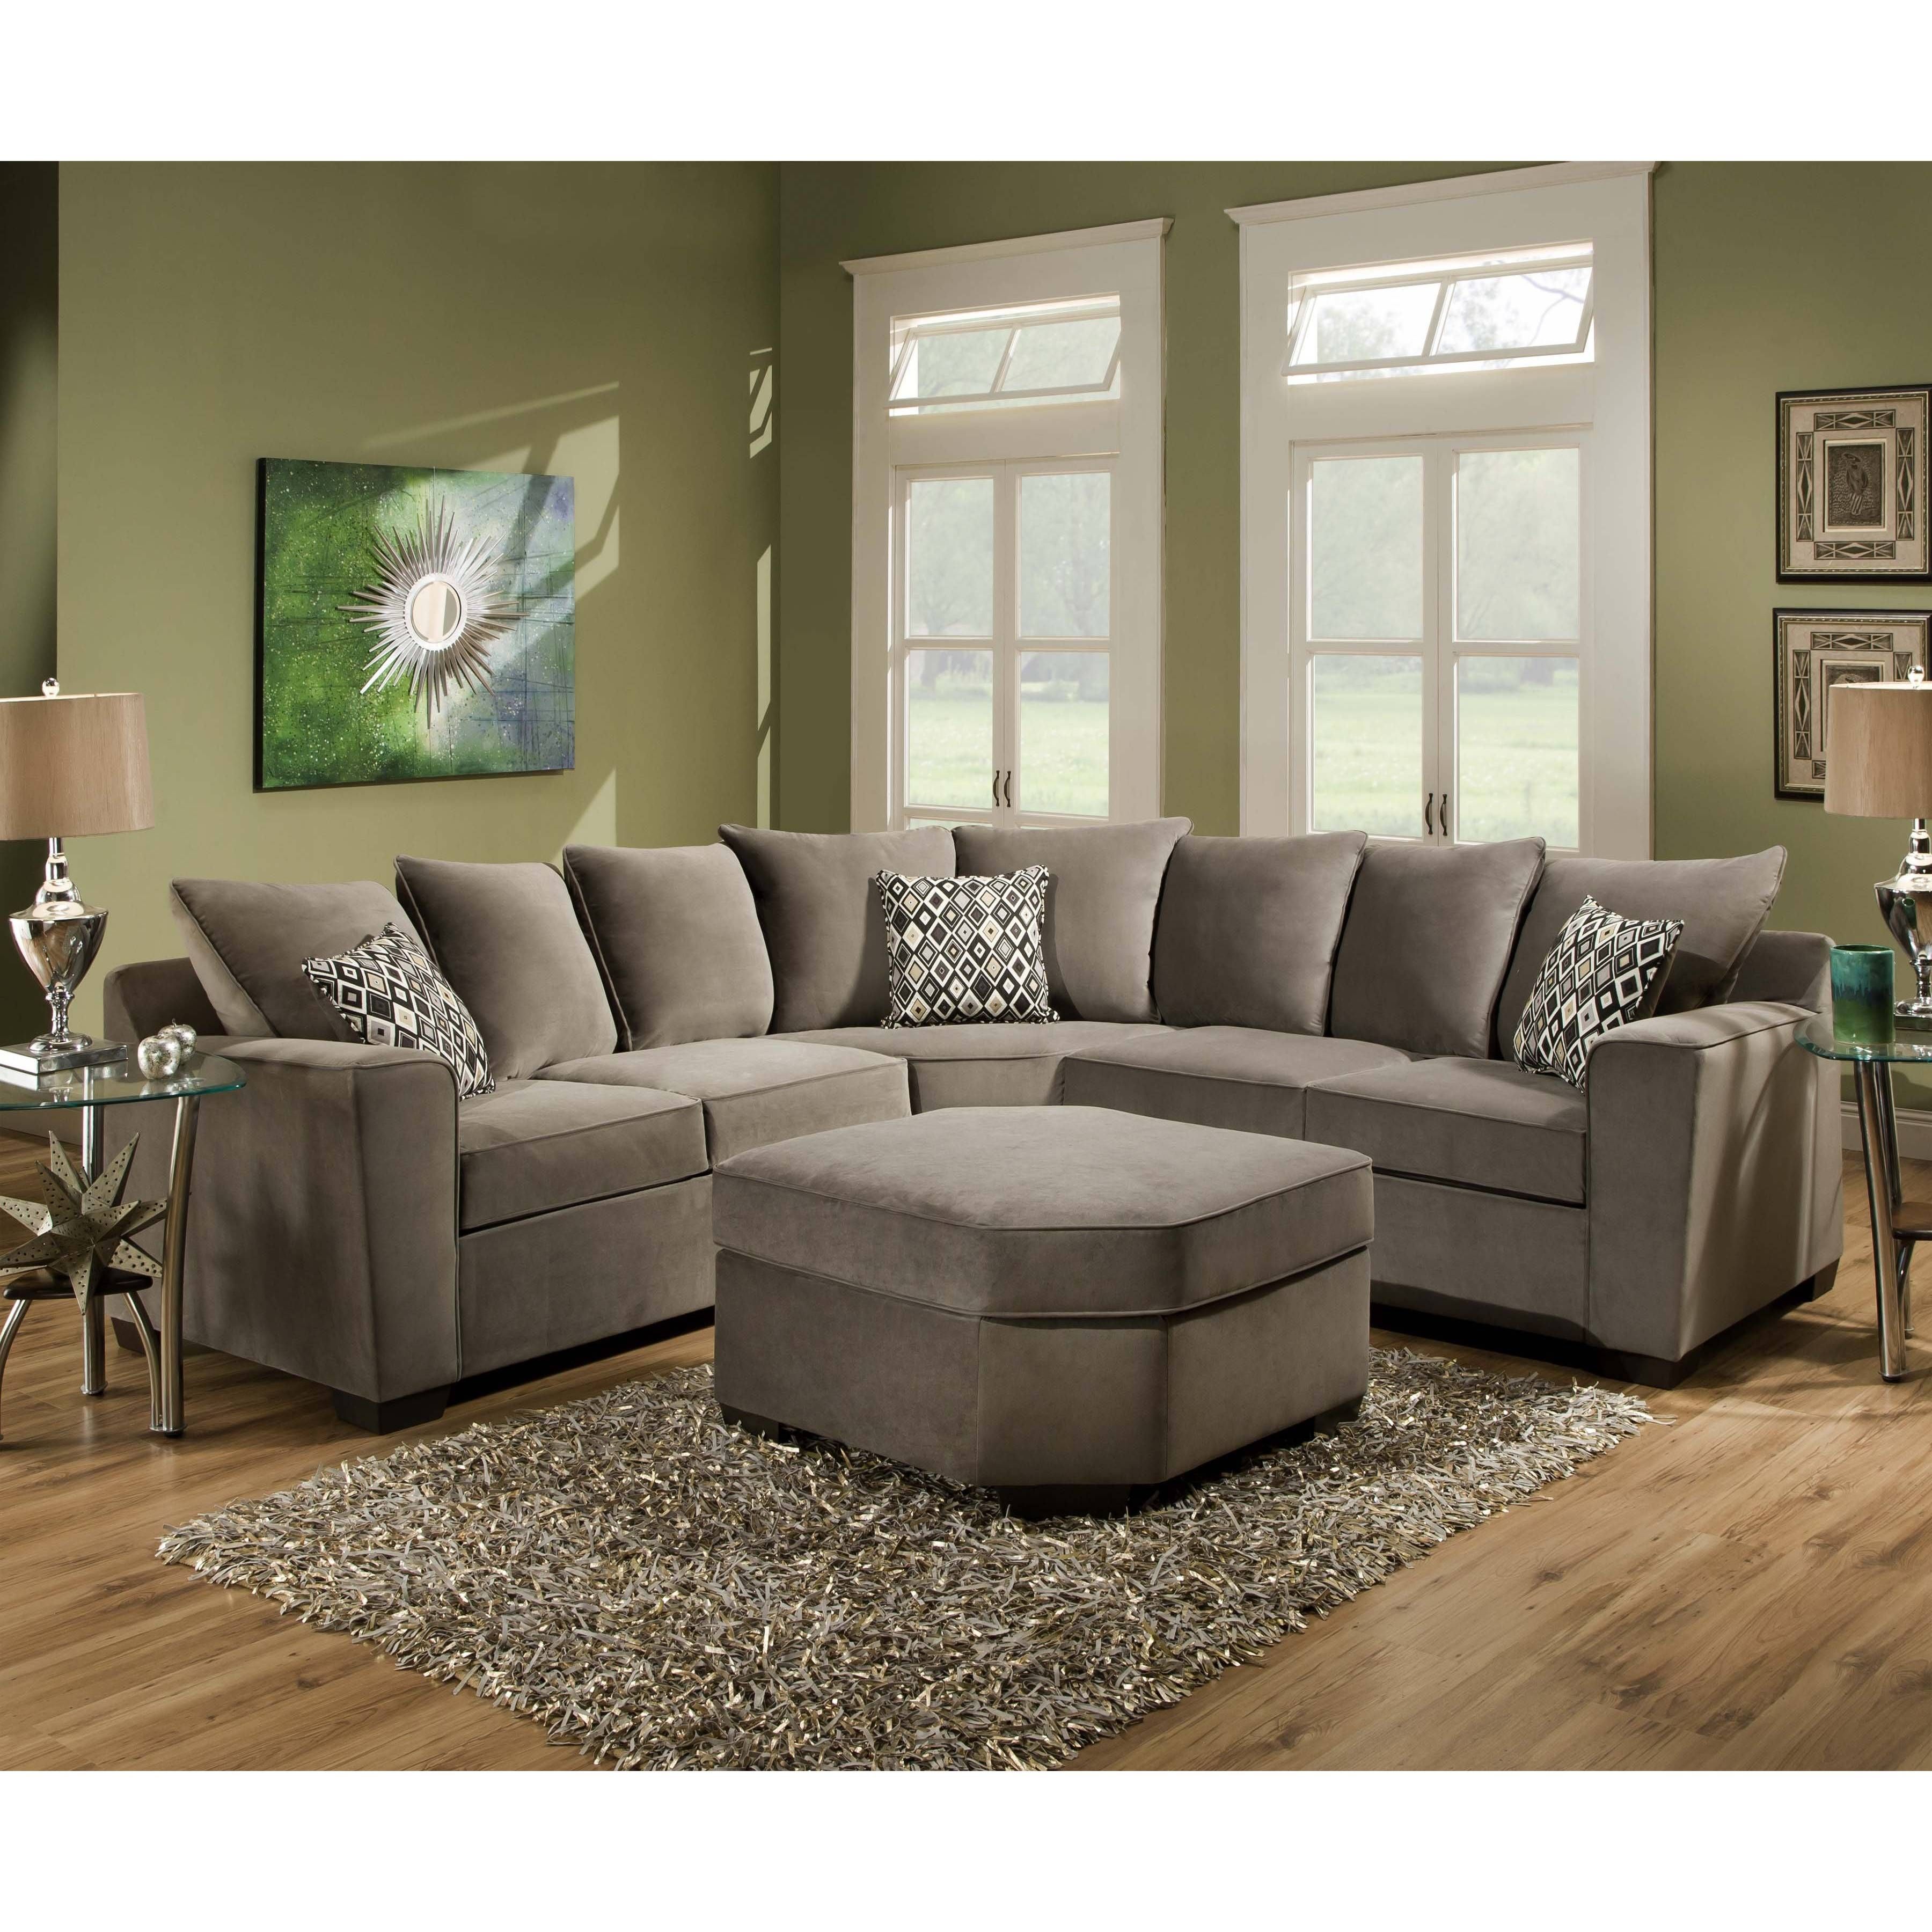 Contemporary Living Room Sets San Diego Inside Decorating With Sectional Sofa San Diego (Photo 2 of 30)